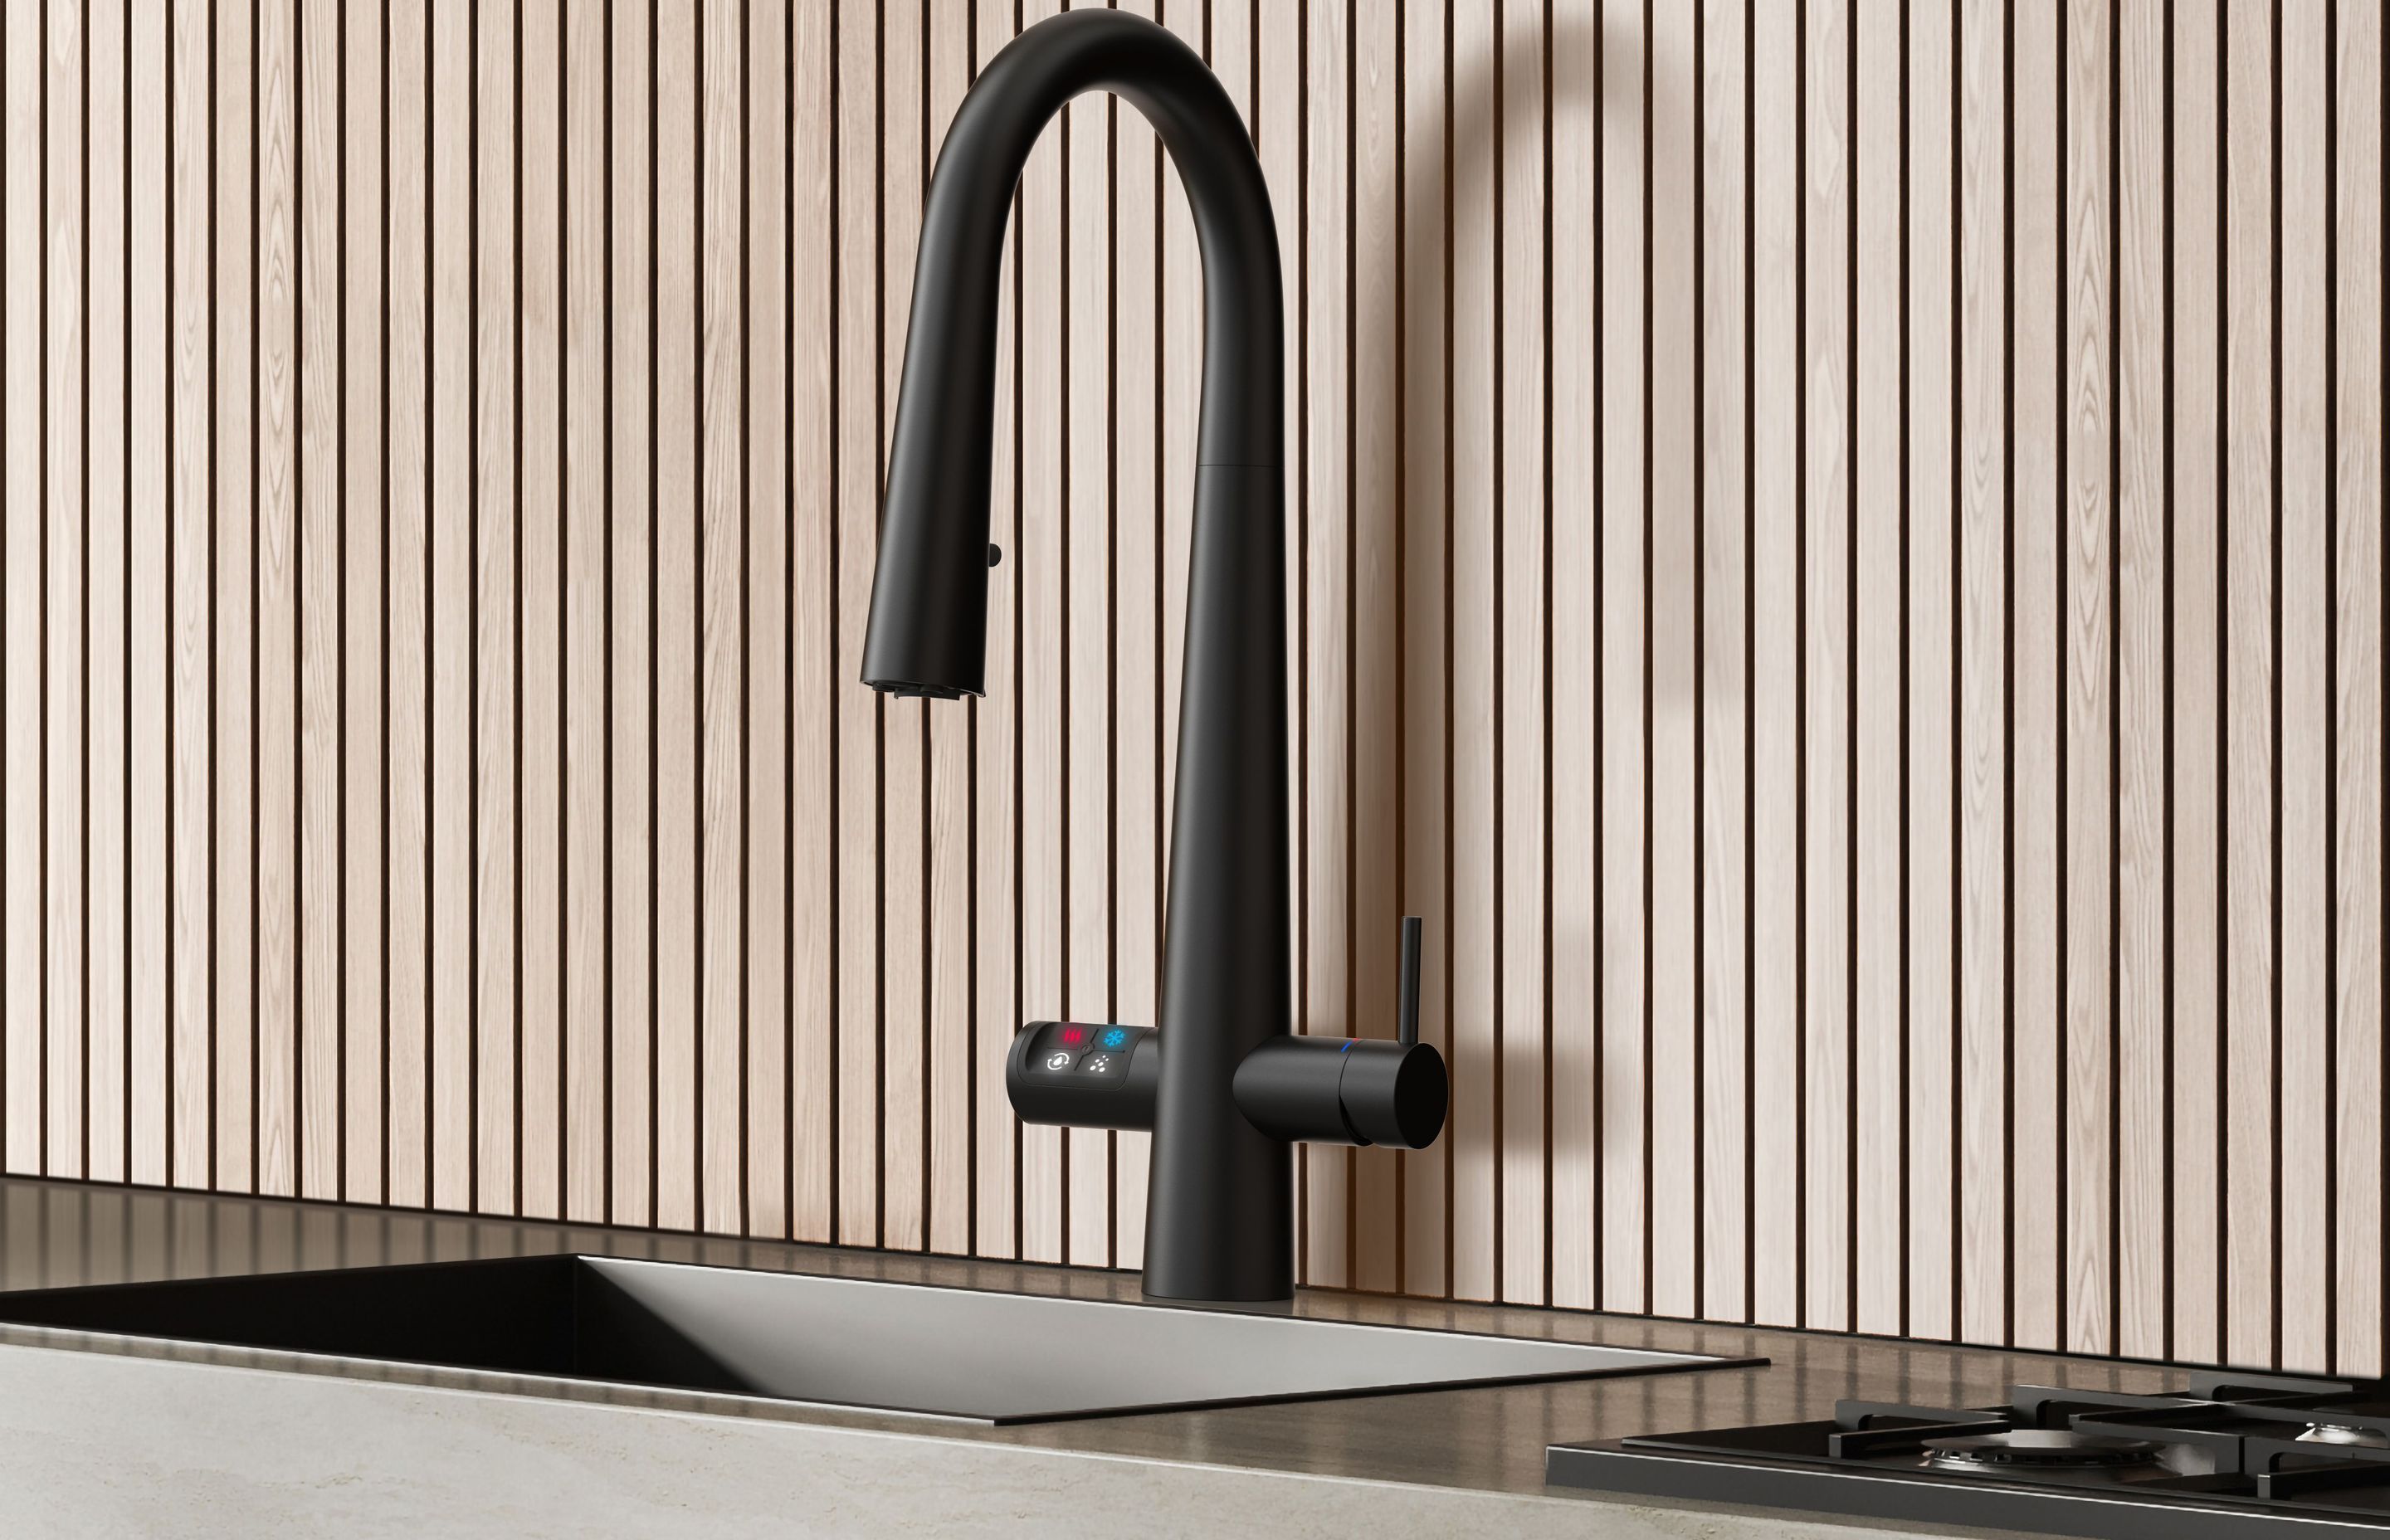 Available in seven modern finishes, Zenith’s matte black option is perfect for contemporary interiors.